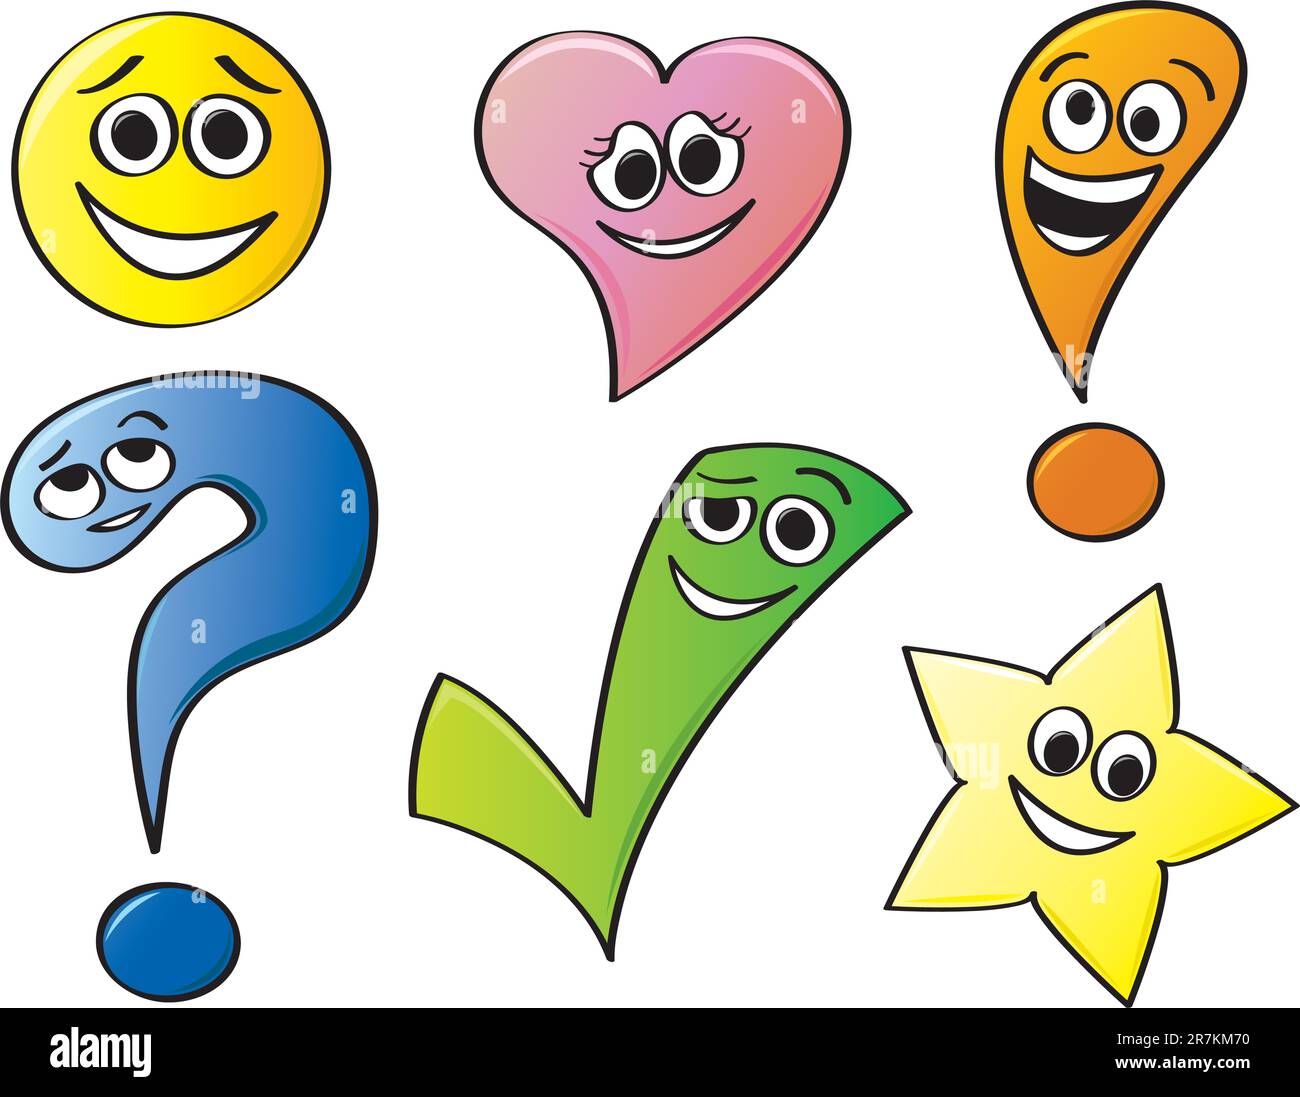 Common shapes with various cartoon facial expressions. Stock Vector